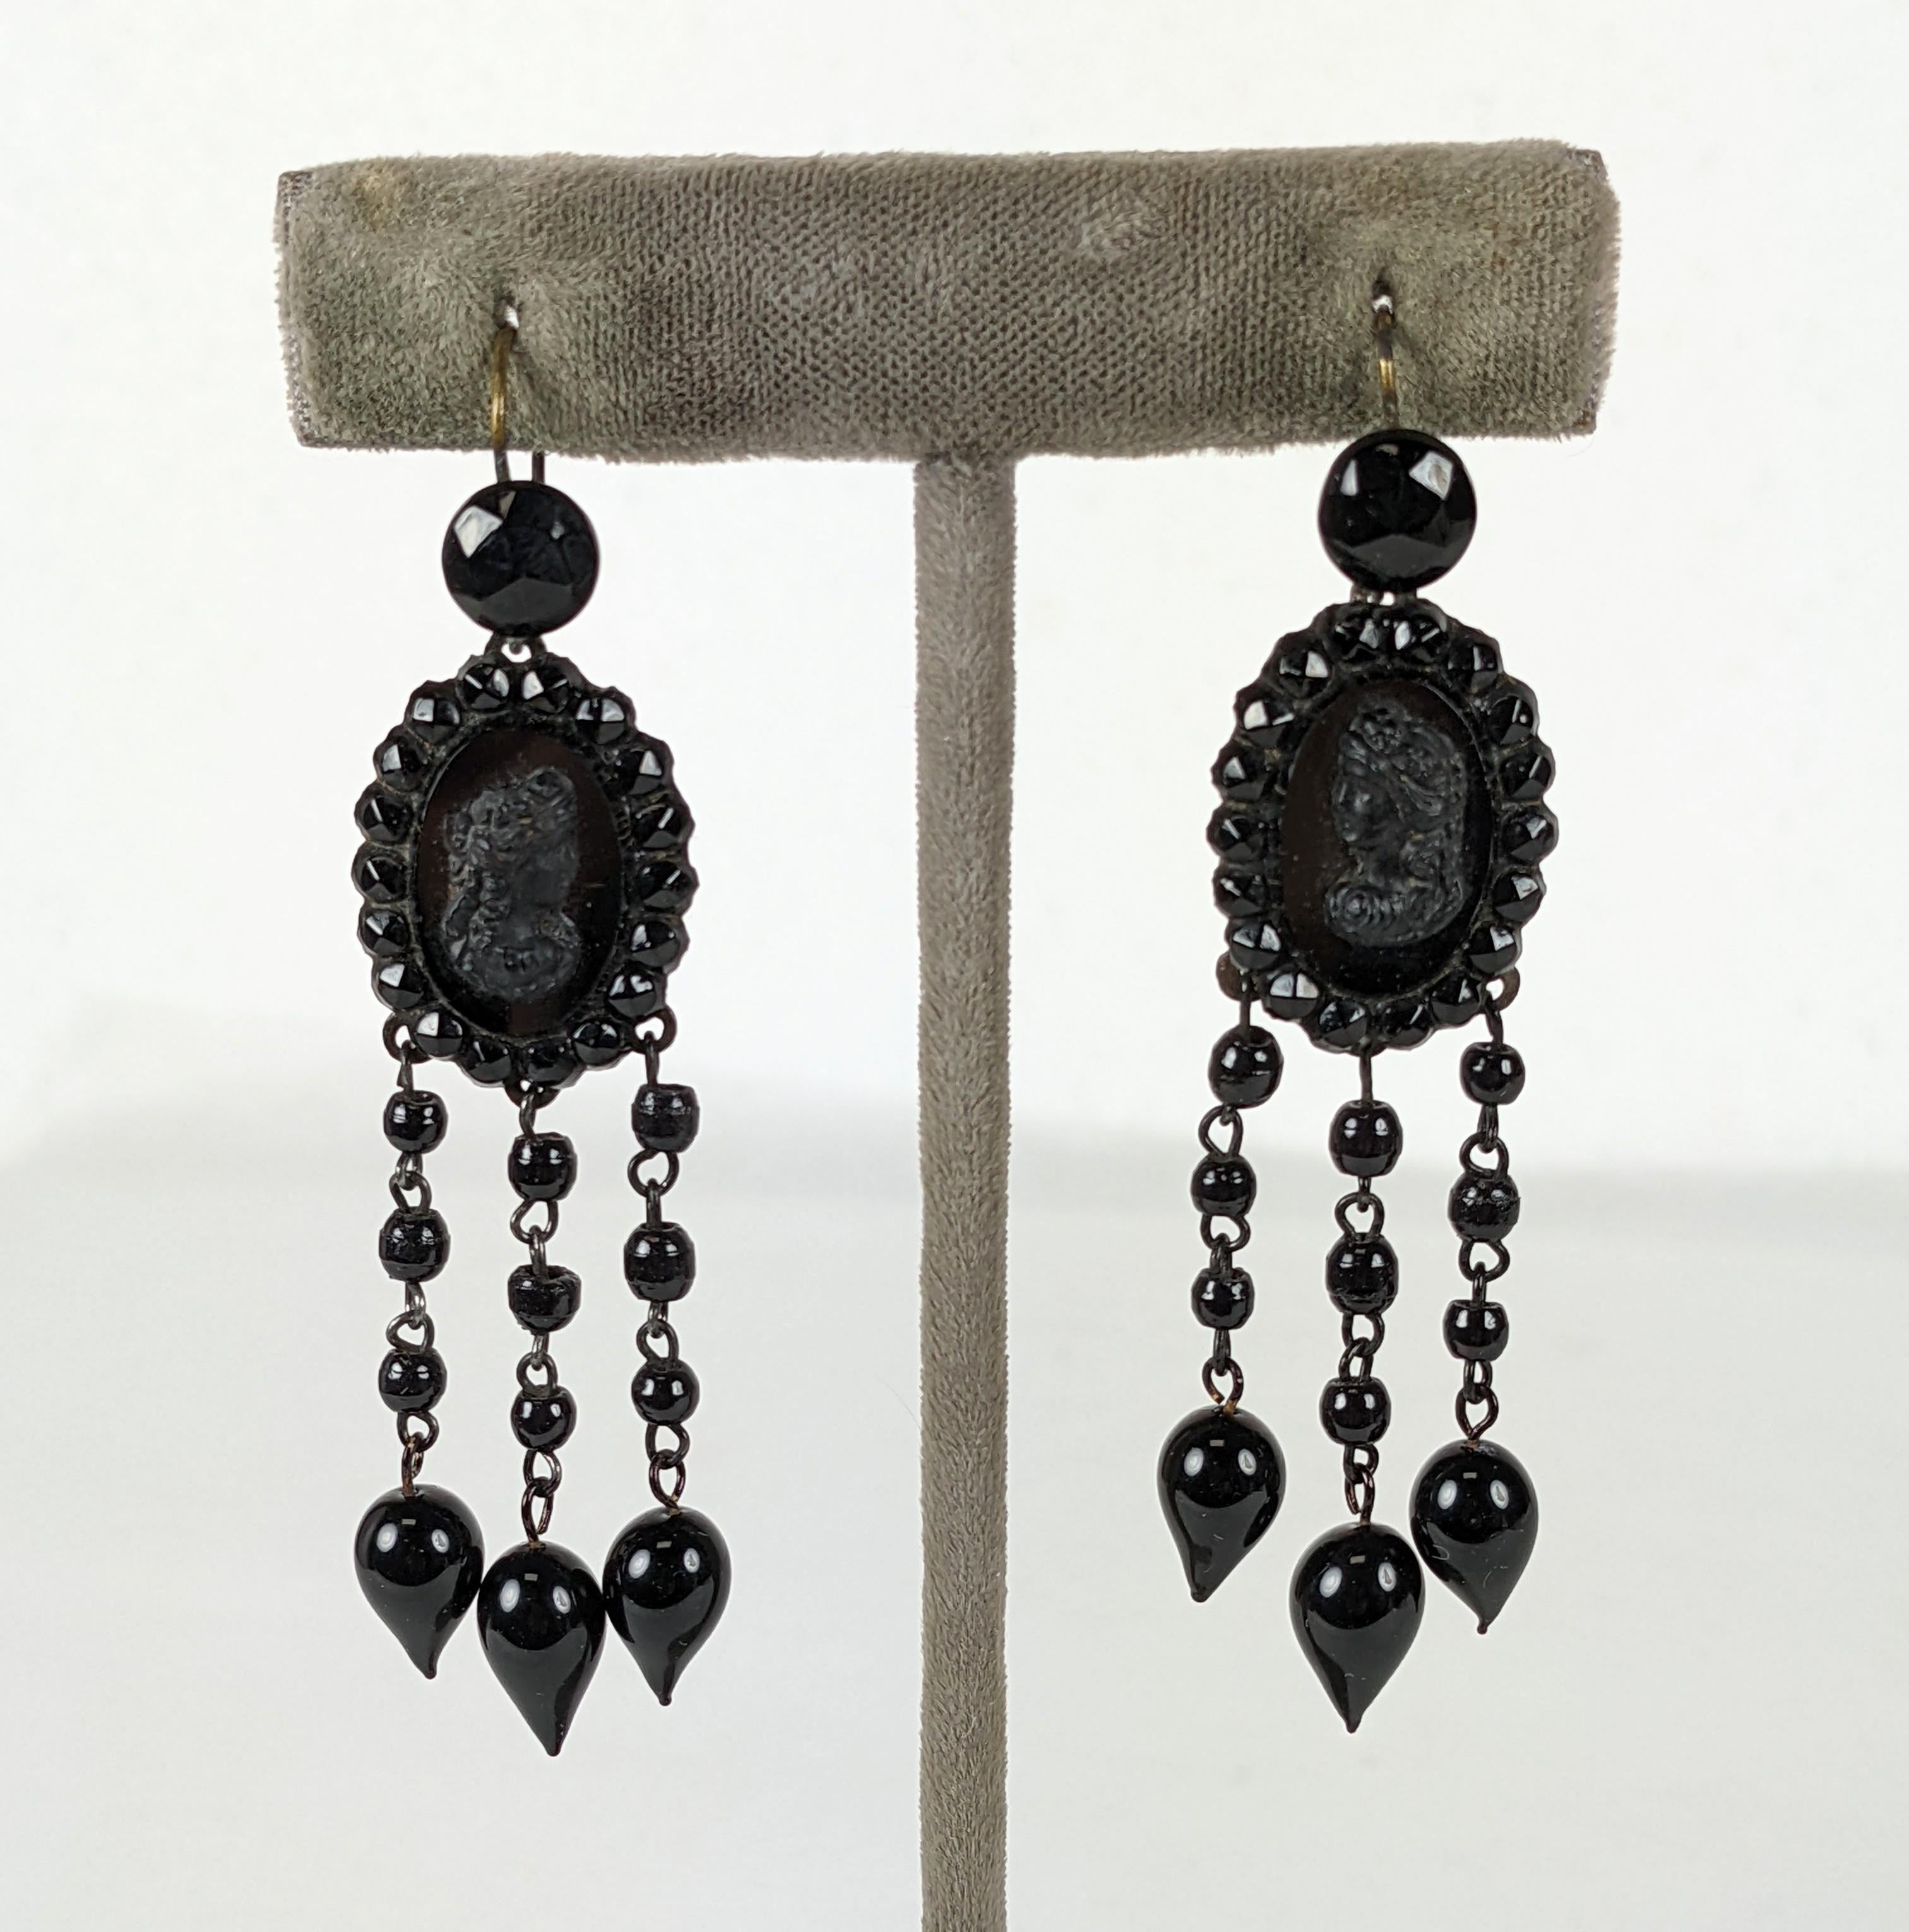 Victorian long french jet earrings of faceted and smooth jet cabocheons, round beads and tear drop shaped drops. With focal cameo ovals facing one another. Blackened steel fittings. Excellent Condition, French wire ear hooks. 
Length  2.75